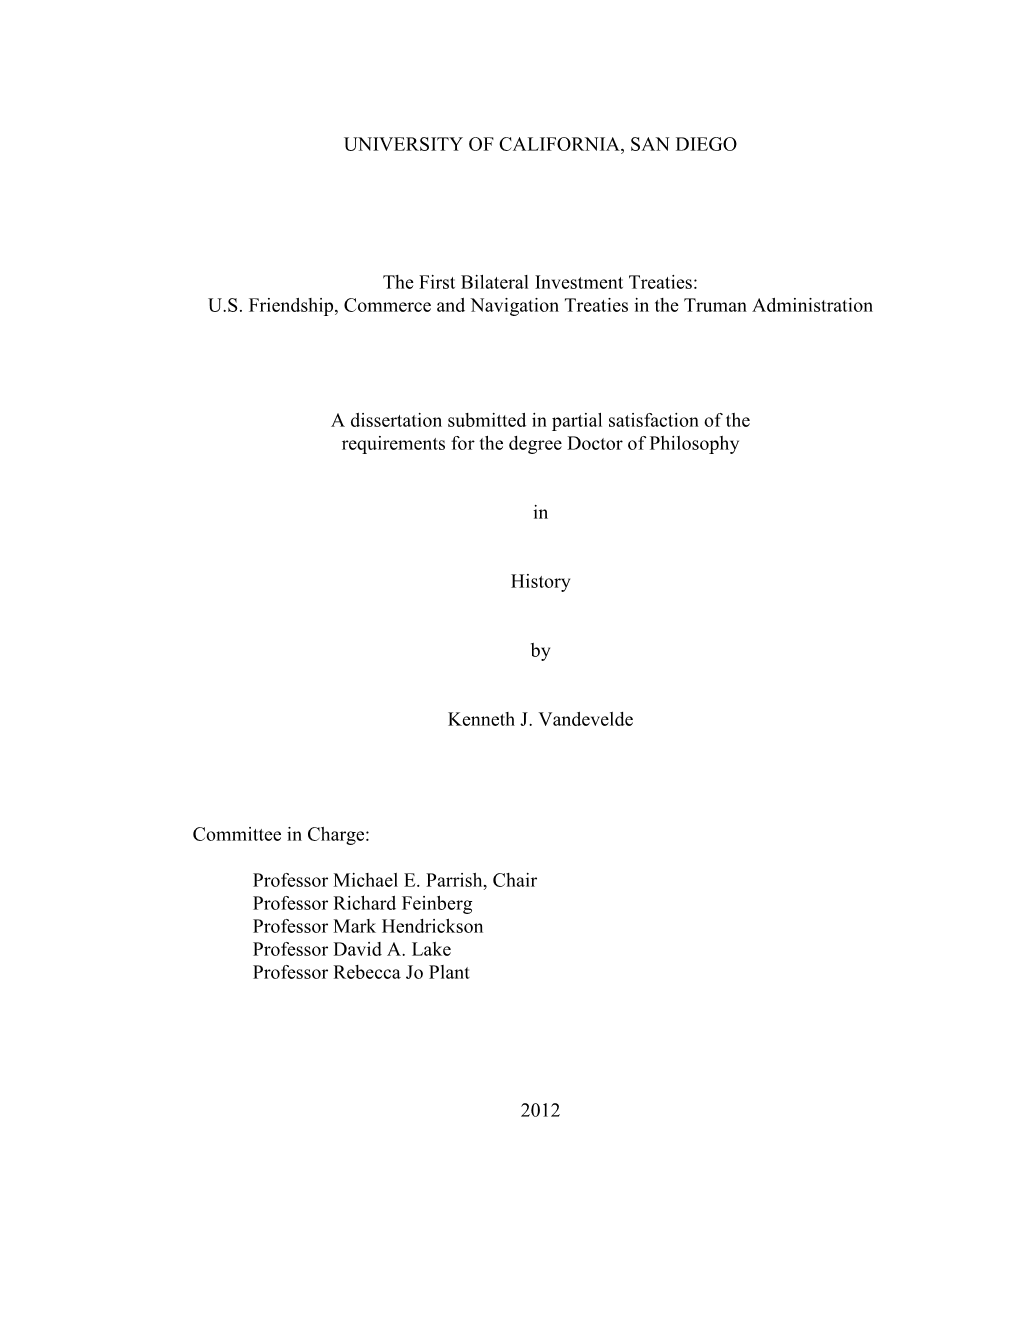 US Friendship, Commerce and Navigation Treaties I